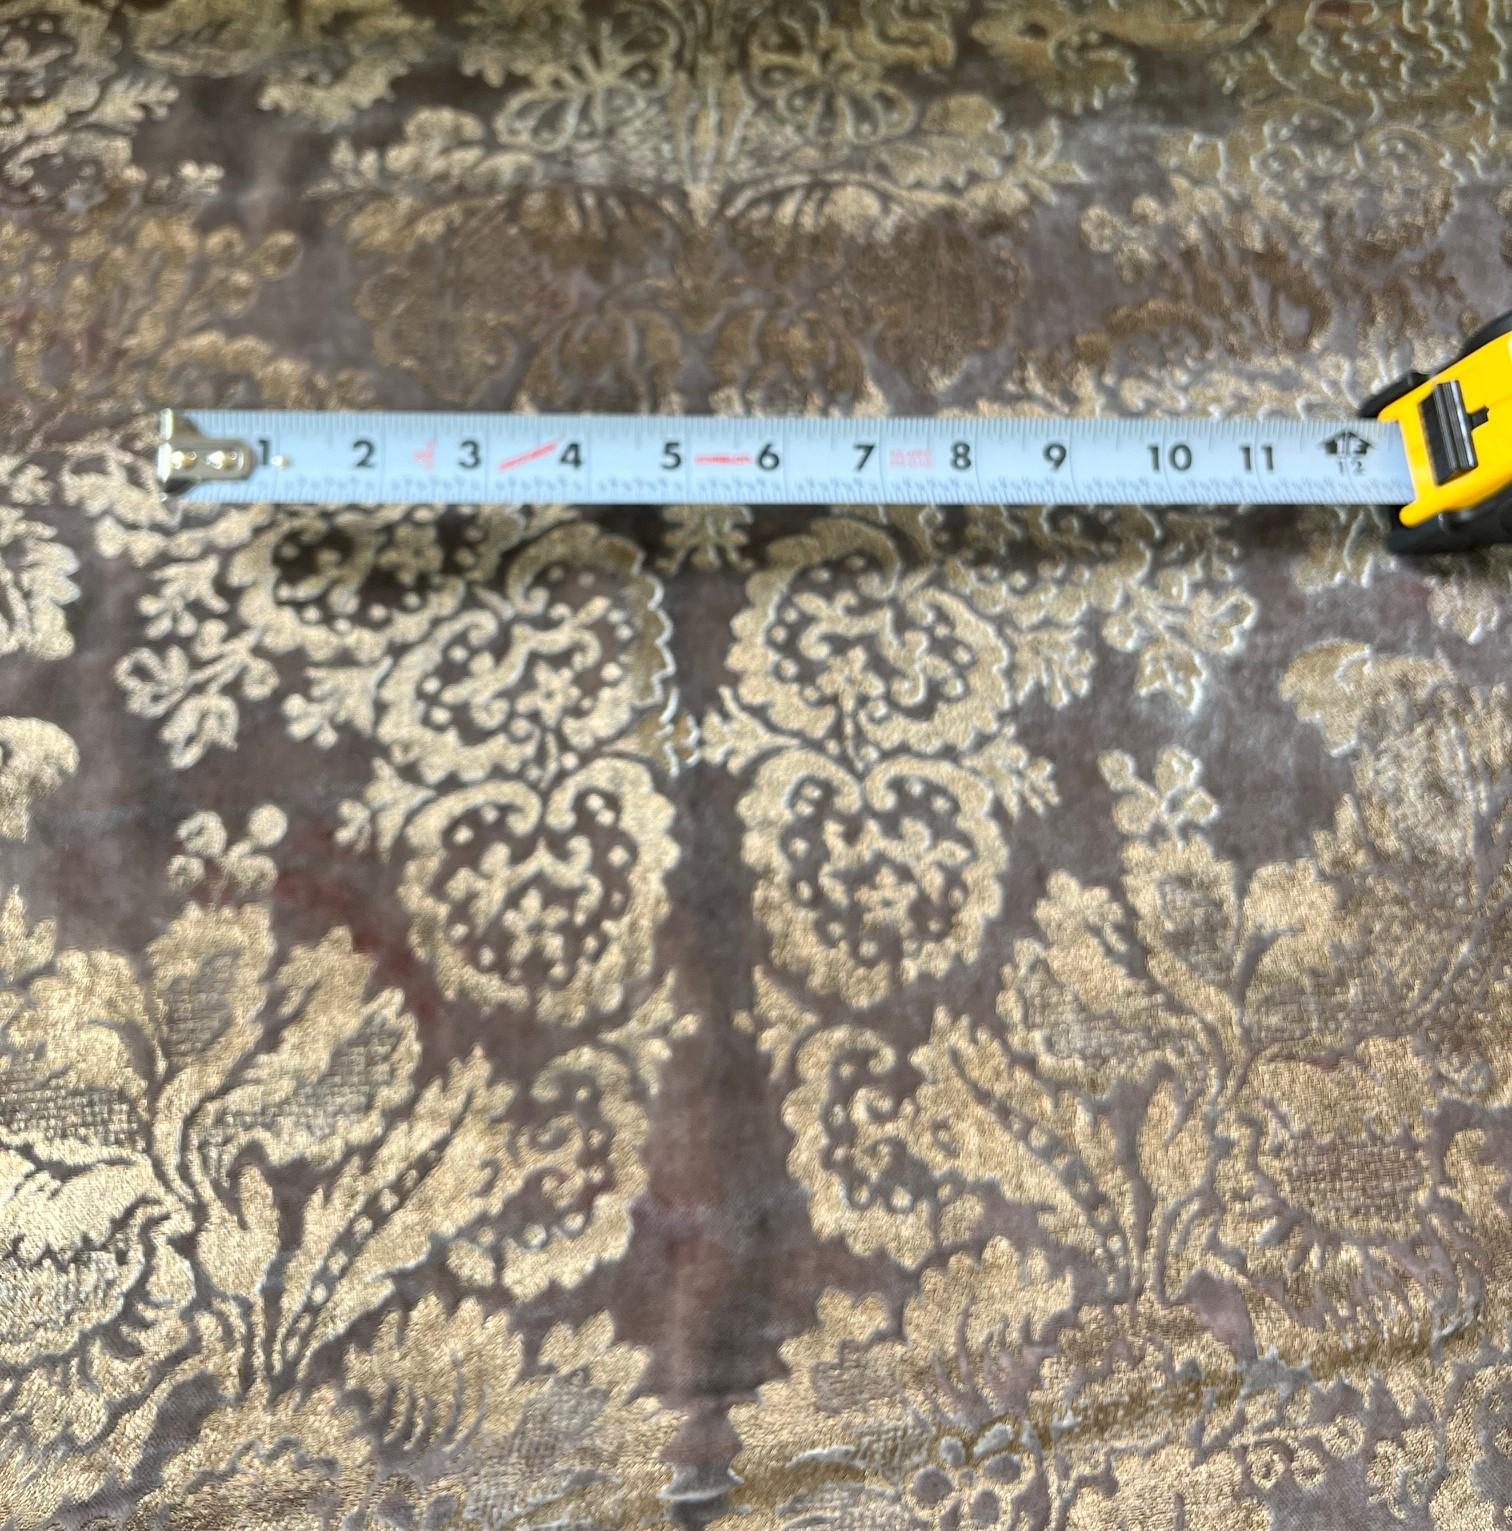 Hand dyed and stamped Fortuny silk velvet fabric in warm french brown and pigmented gold. This is a truly magnificent hand stamped velvet damask fabric. This fabric is hand made using hand dyed velvet for the base cloth and wooden blocks silk